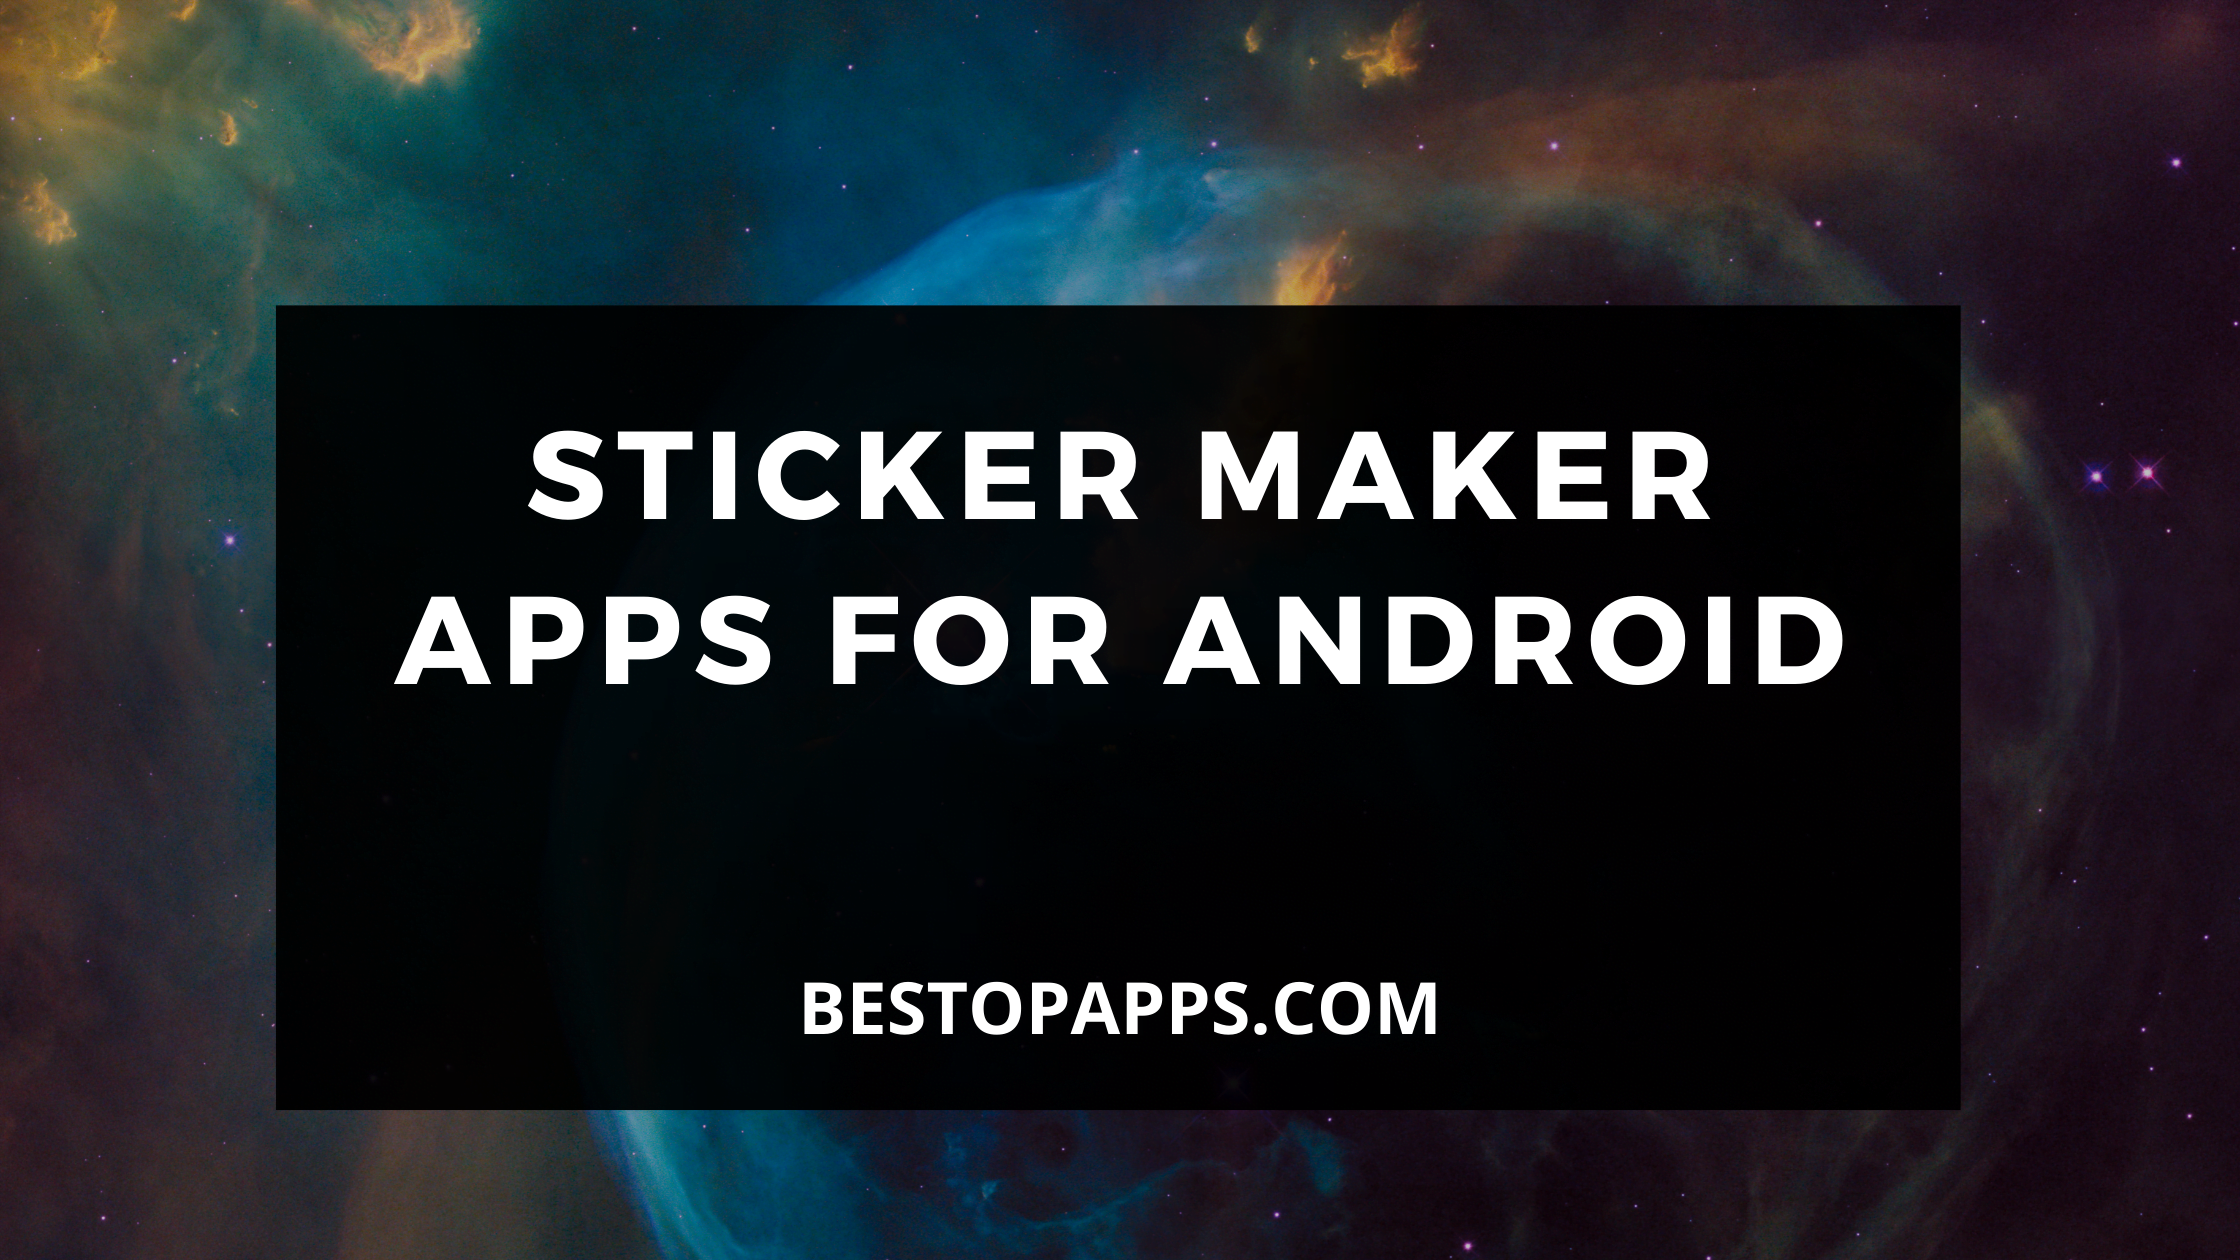 STICKER-MAKER-APPS-FOR-ANDROID